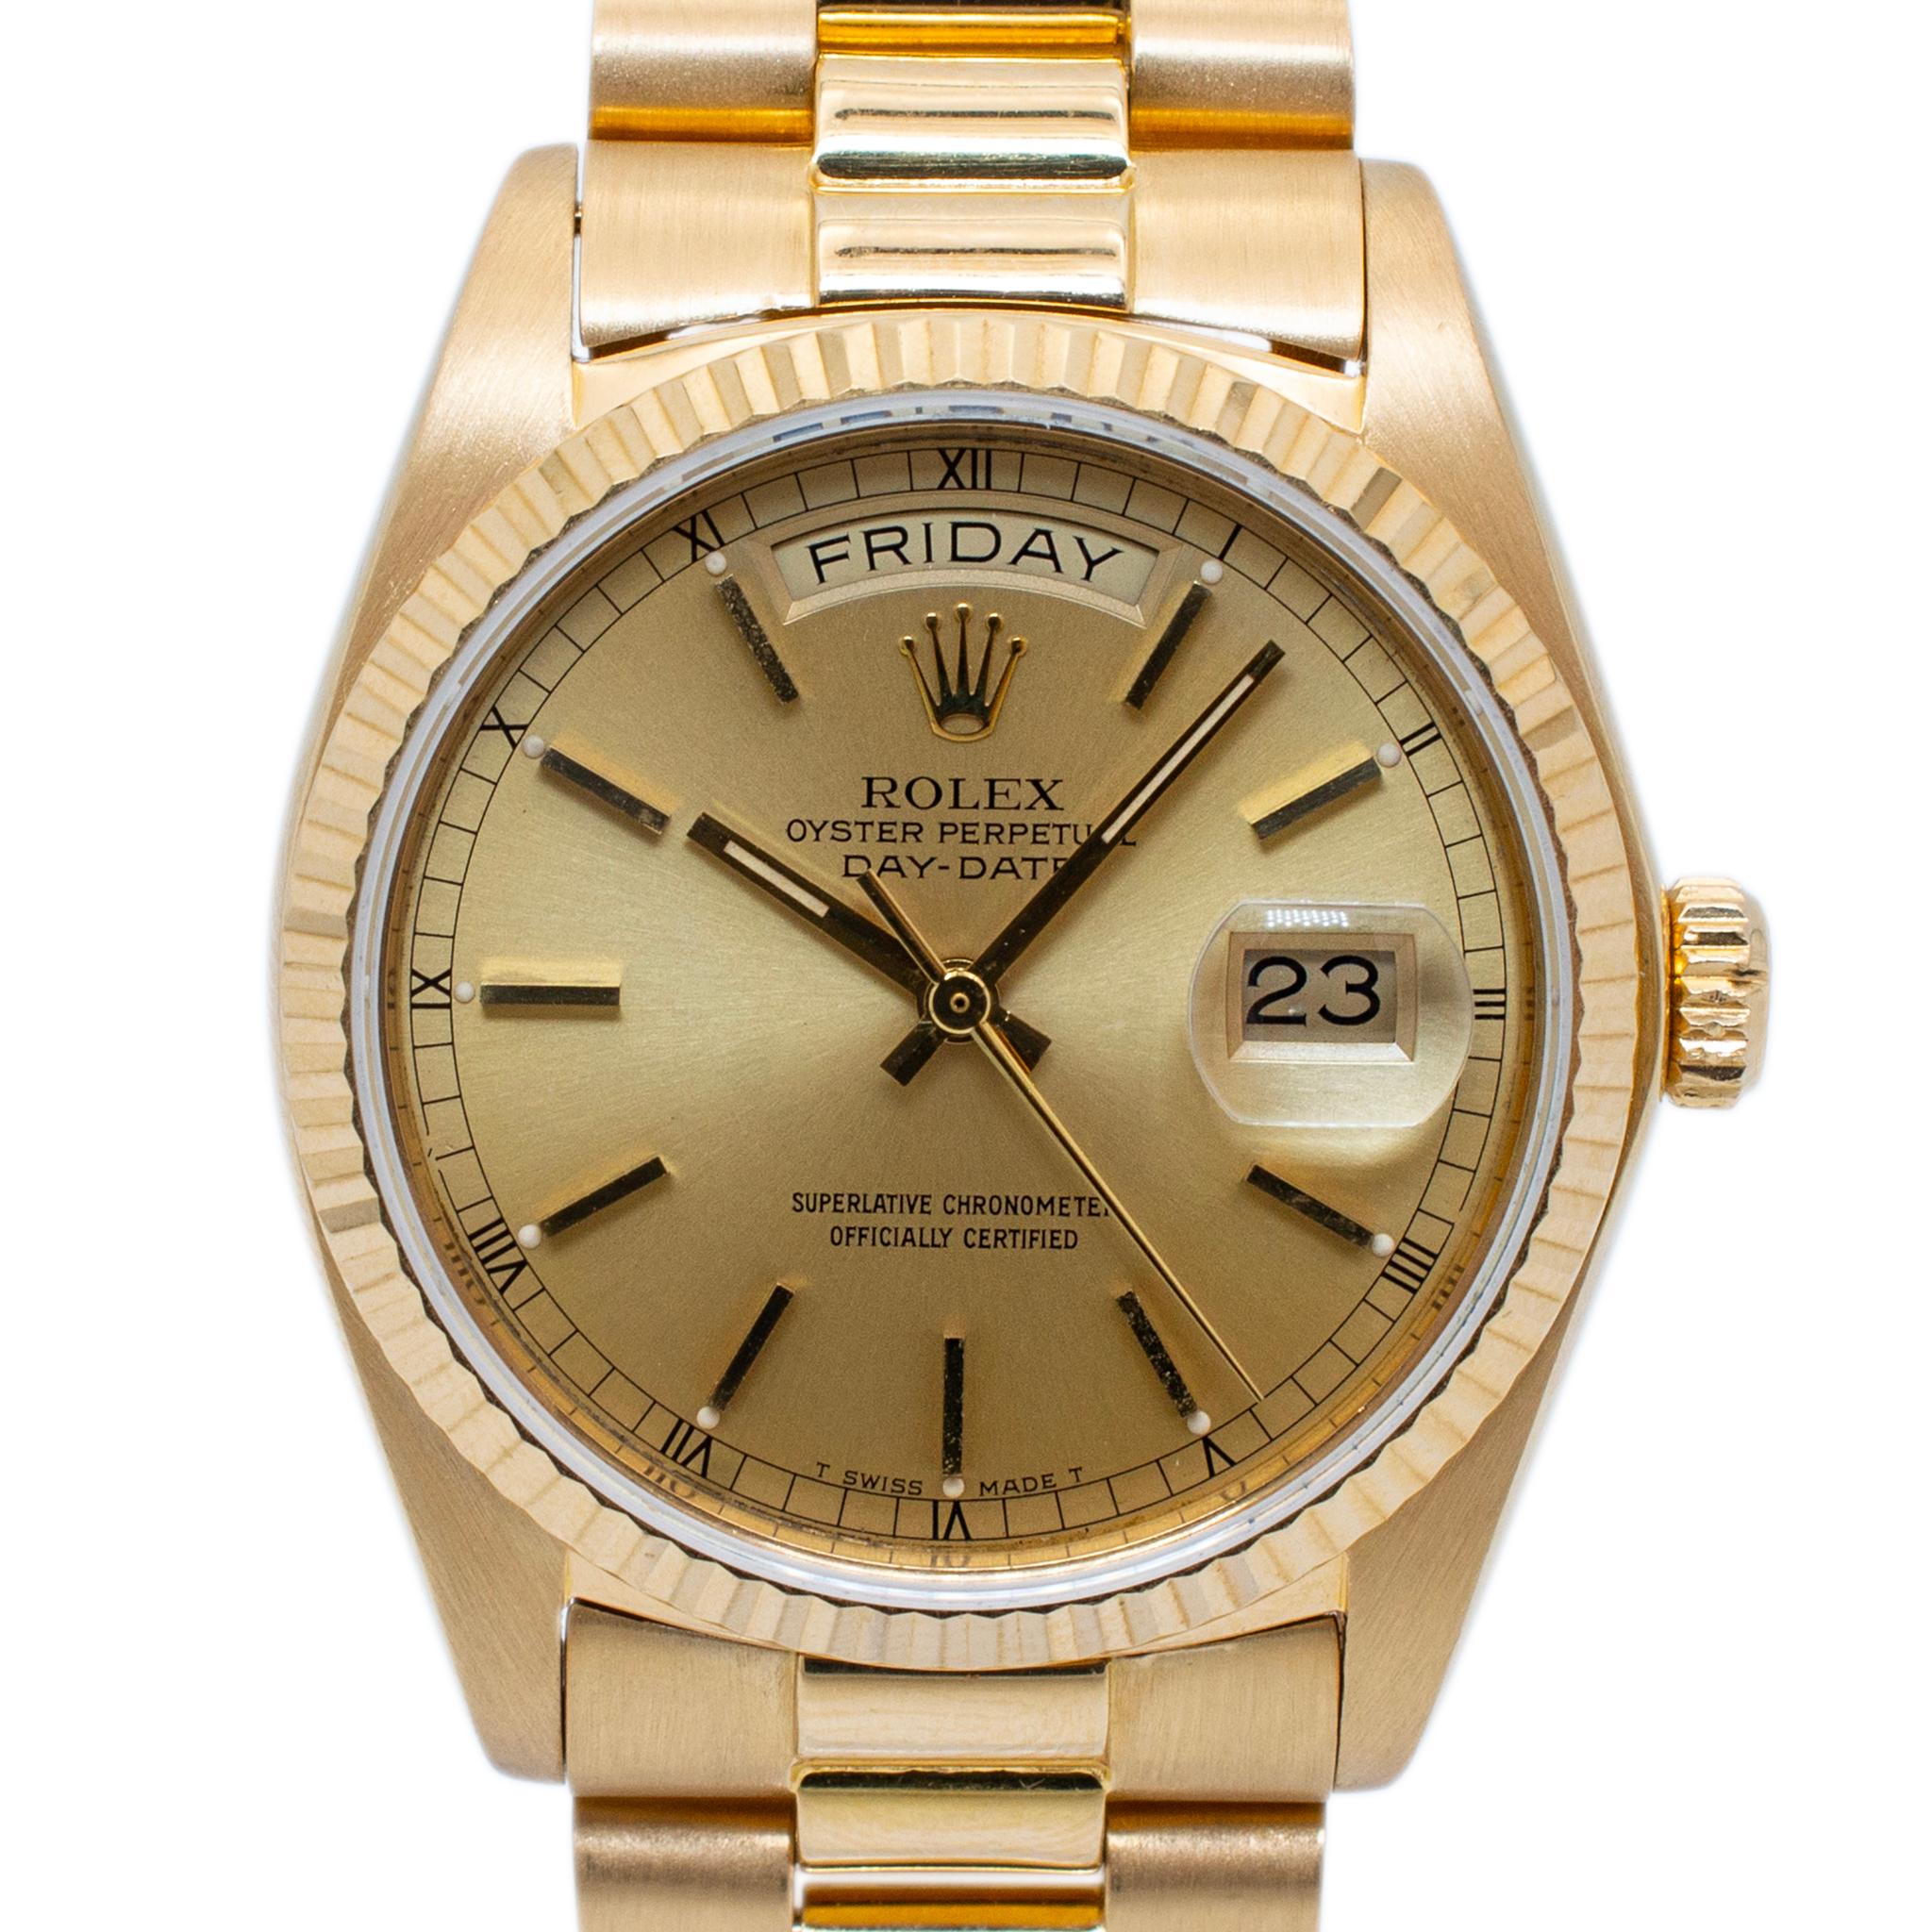 Metal Type: 18K Yellow Gold

Brand: Rolex

Diameter: 36.00 mm

Total Weight: 134.80 grams

The metal was tested and determined to be 18K yellow gold. The 